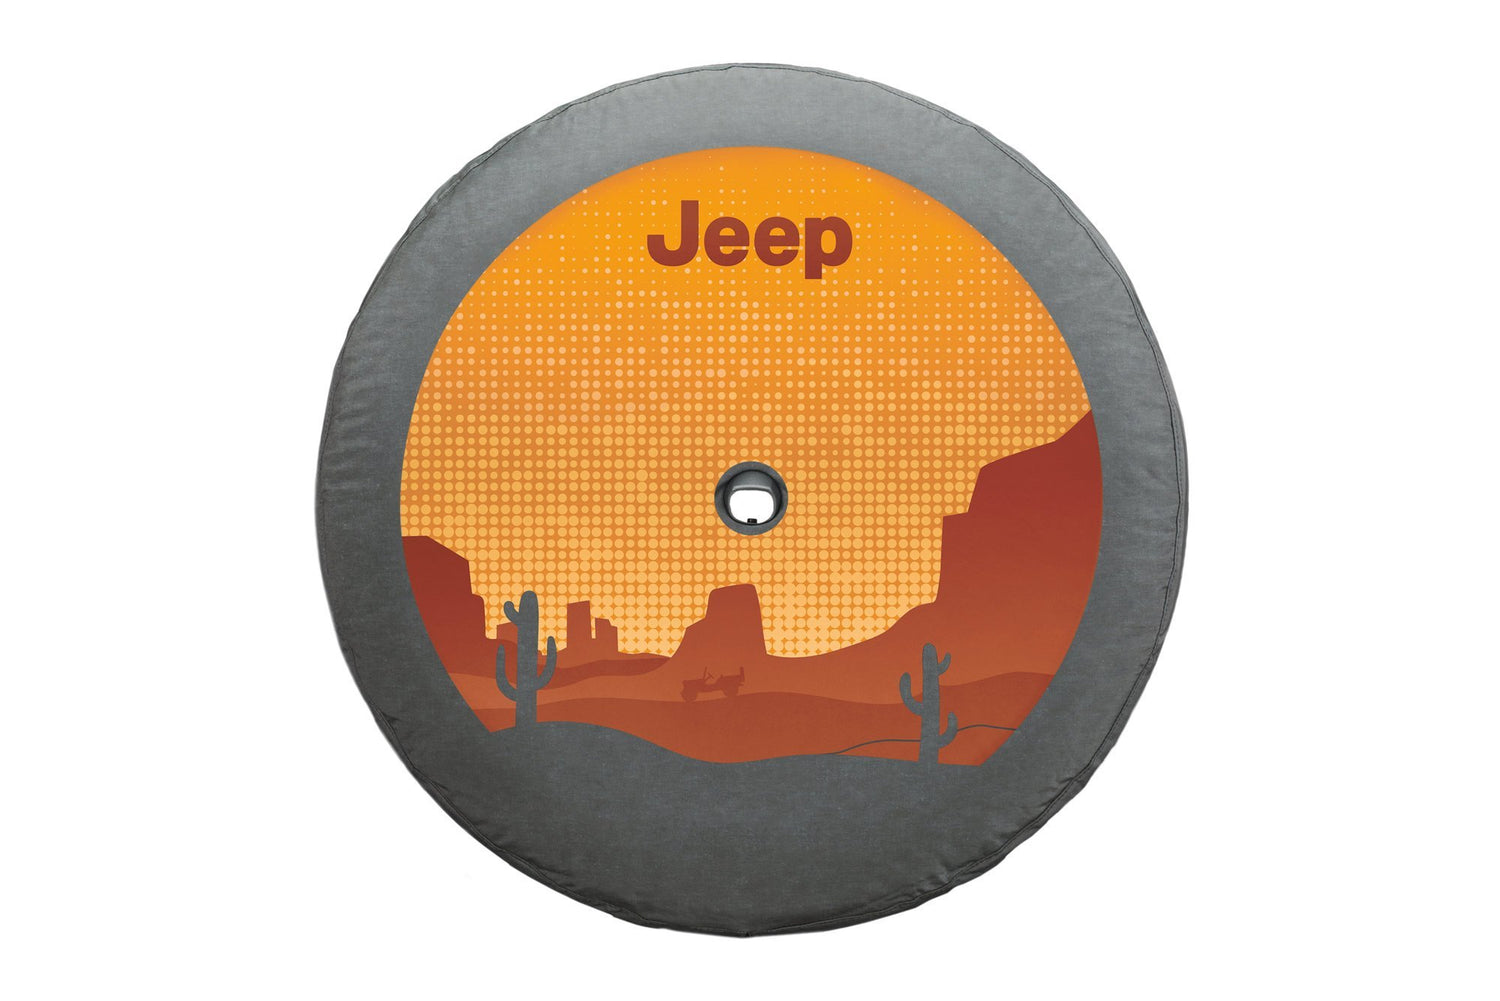 82215441 Desert Themed Spare Tire Cover JL Jeep Tire Cover – 